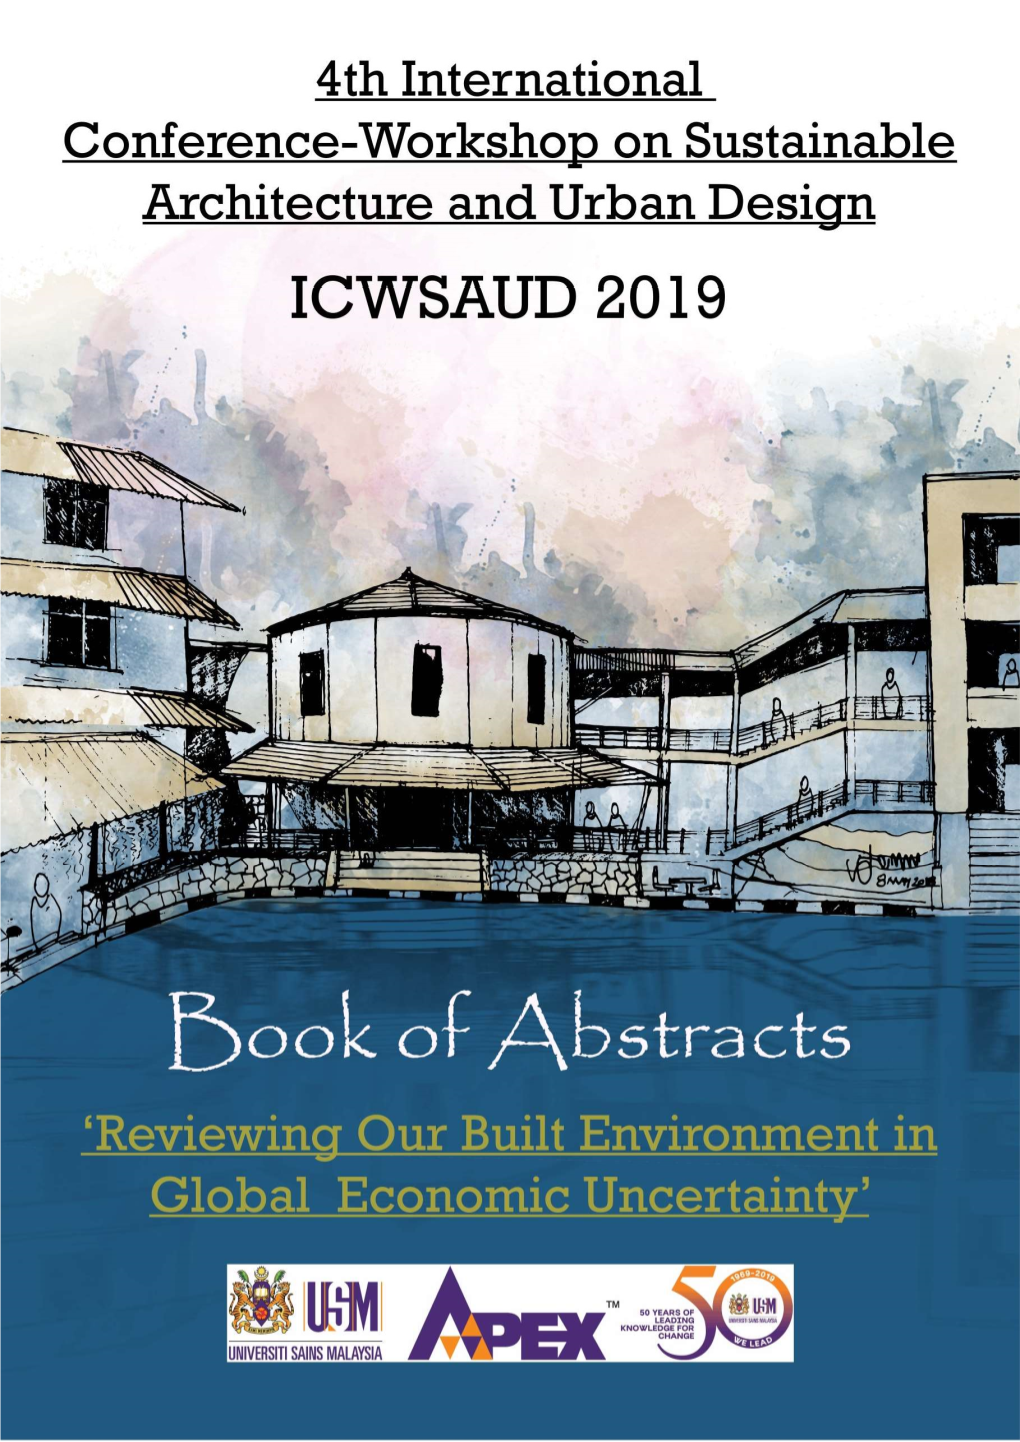 Icwsaud2019-Book-Of-Abstract-3.Pdf